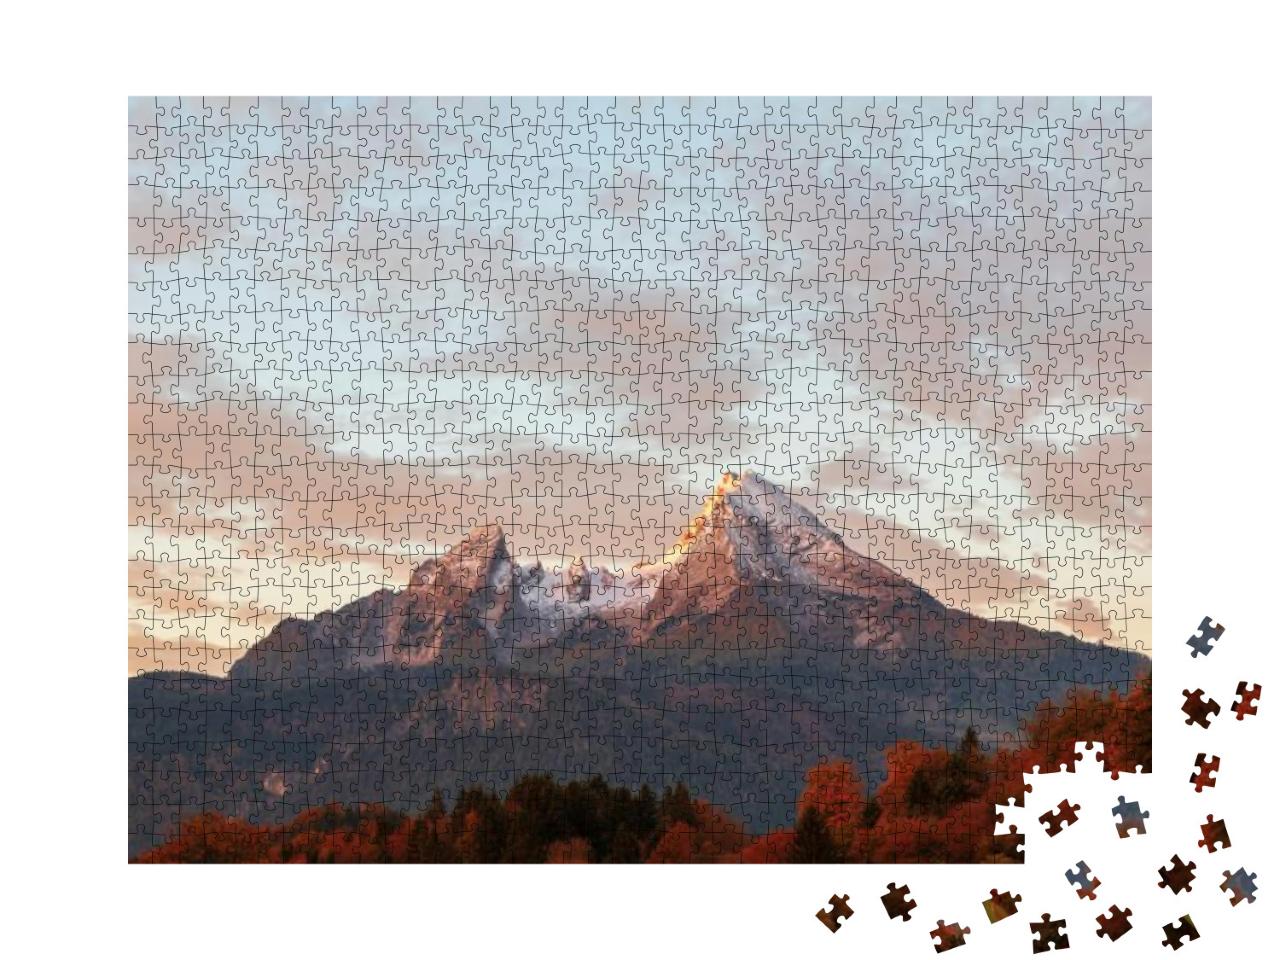 Typical Mountain Scenery in the Background of the Famous... Jigsaw Puzzle with 1000 pieces